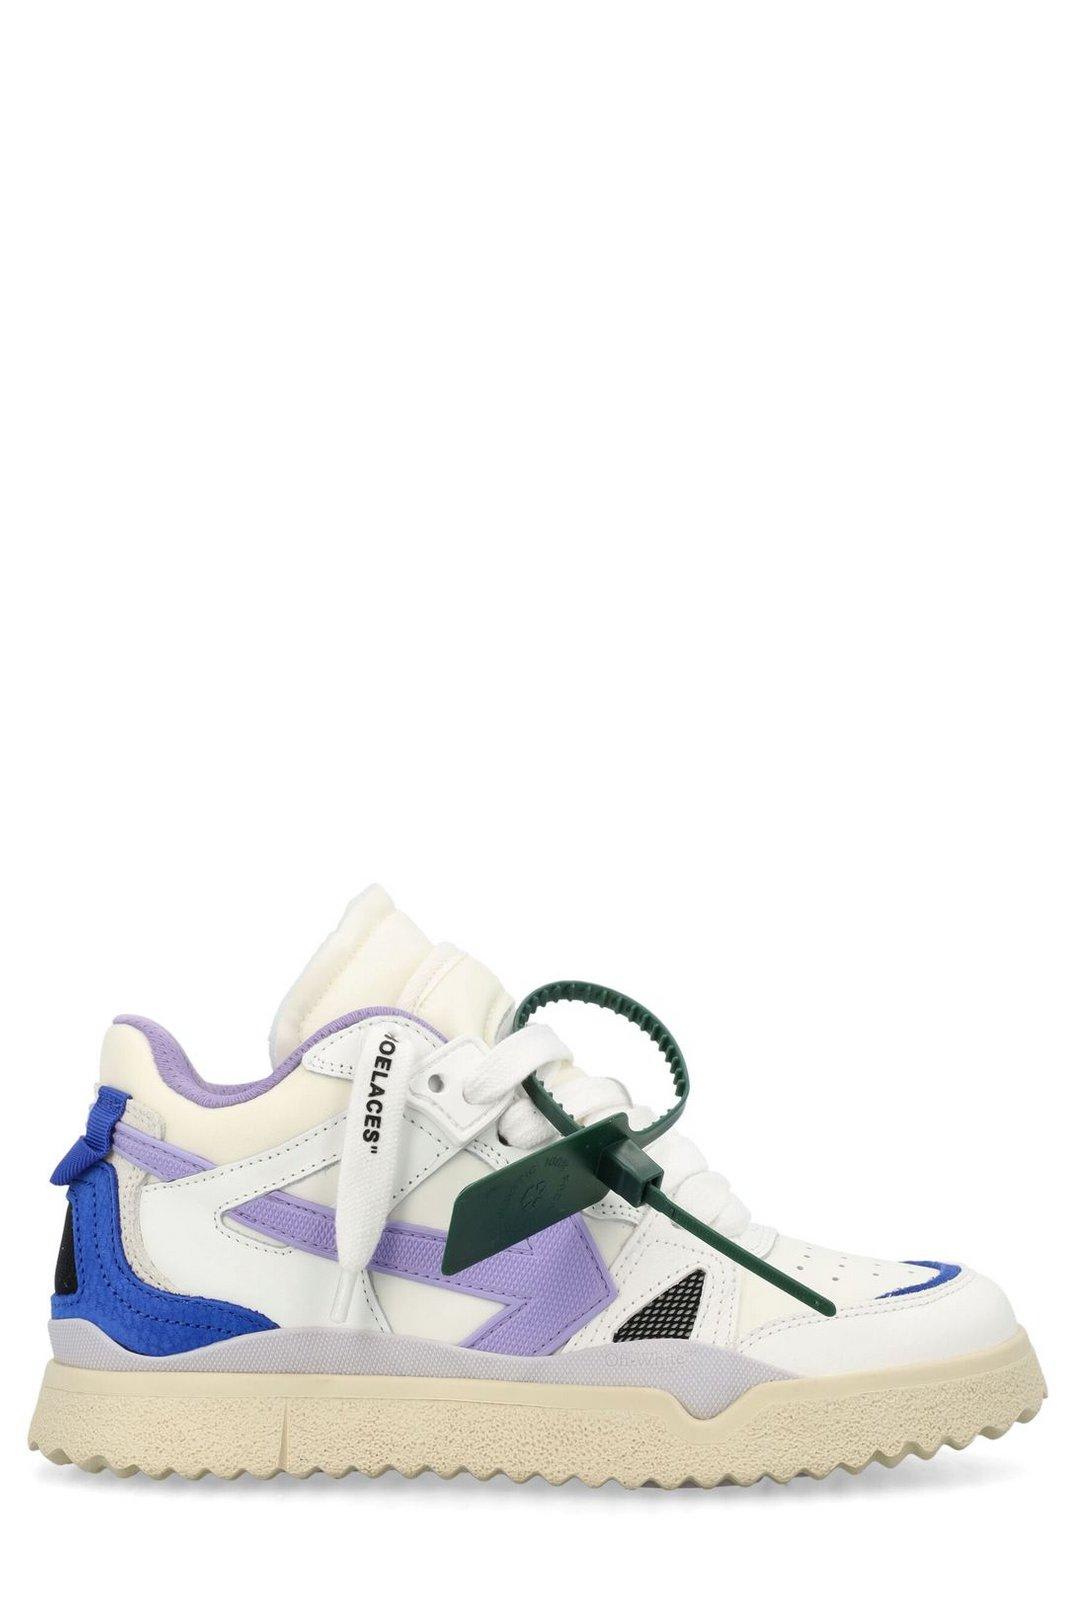 OFF-WHITE SPONGE LACE-UP SNEAKERS